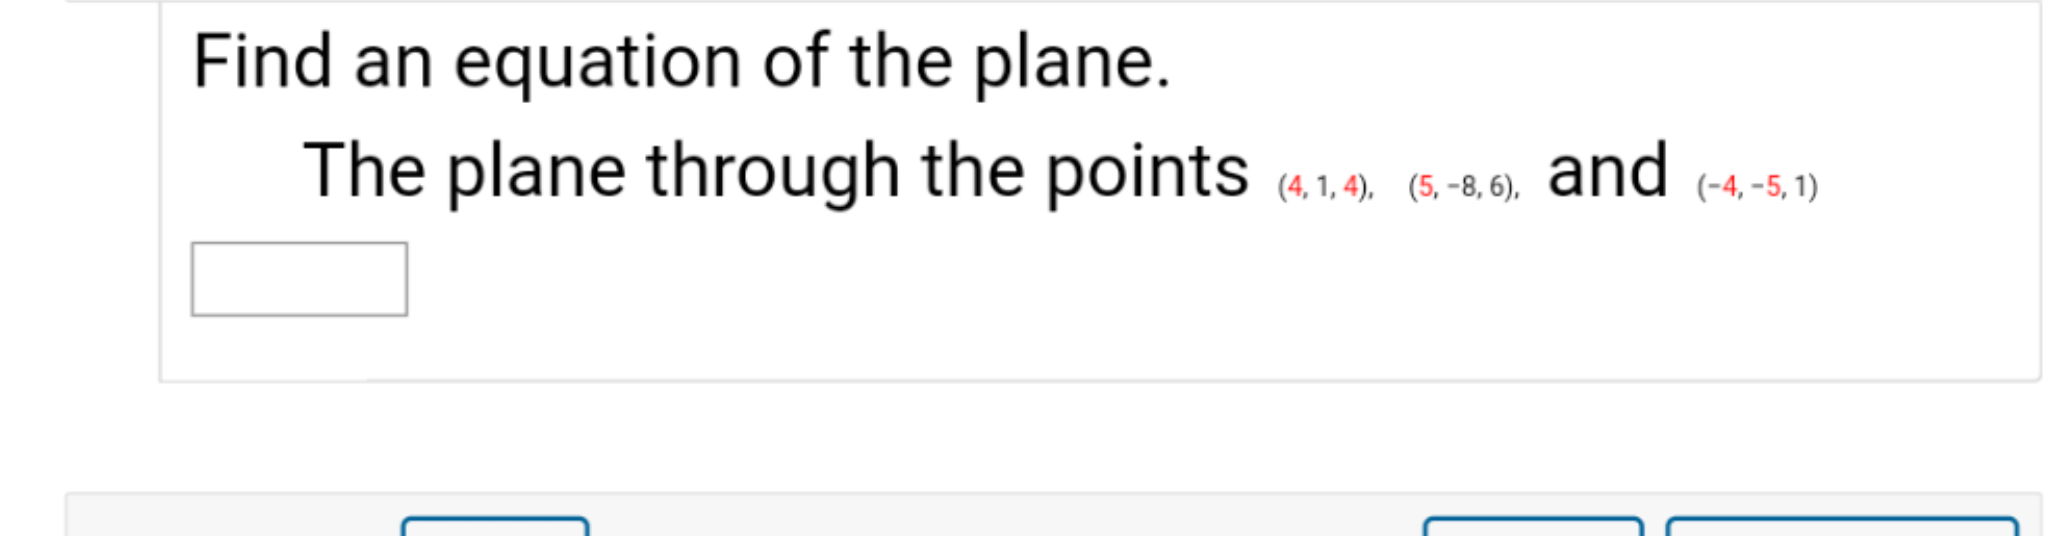 Find an equation of the plane.
The plane through the points
and
(4, 1, 4), (5, -8, 6),
(-4, -5, 1)
